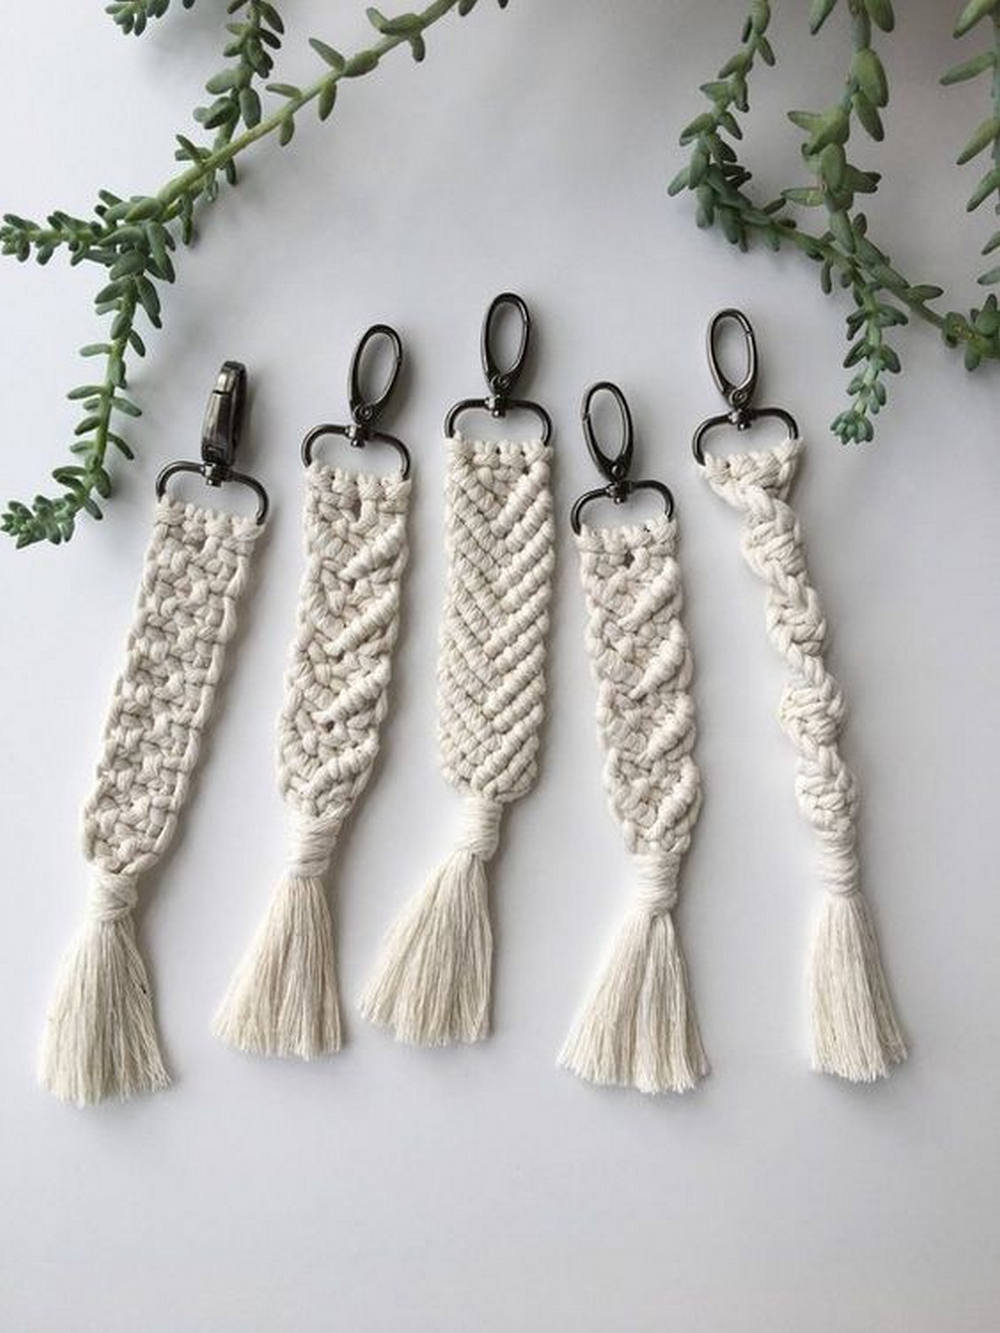 DIY Macrame Keychain – Craft projects for every fan!